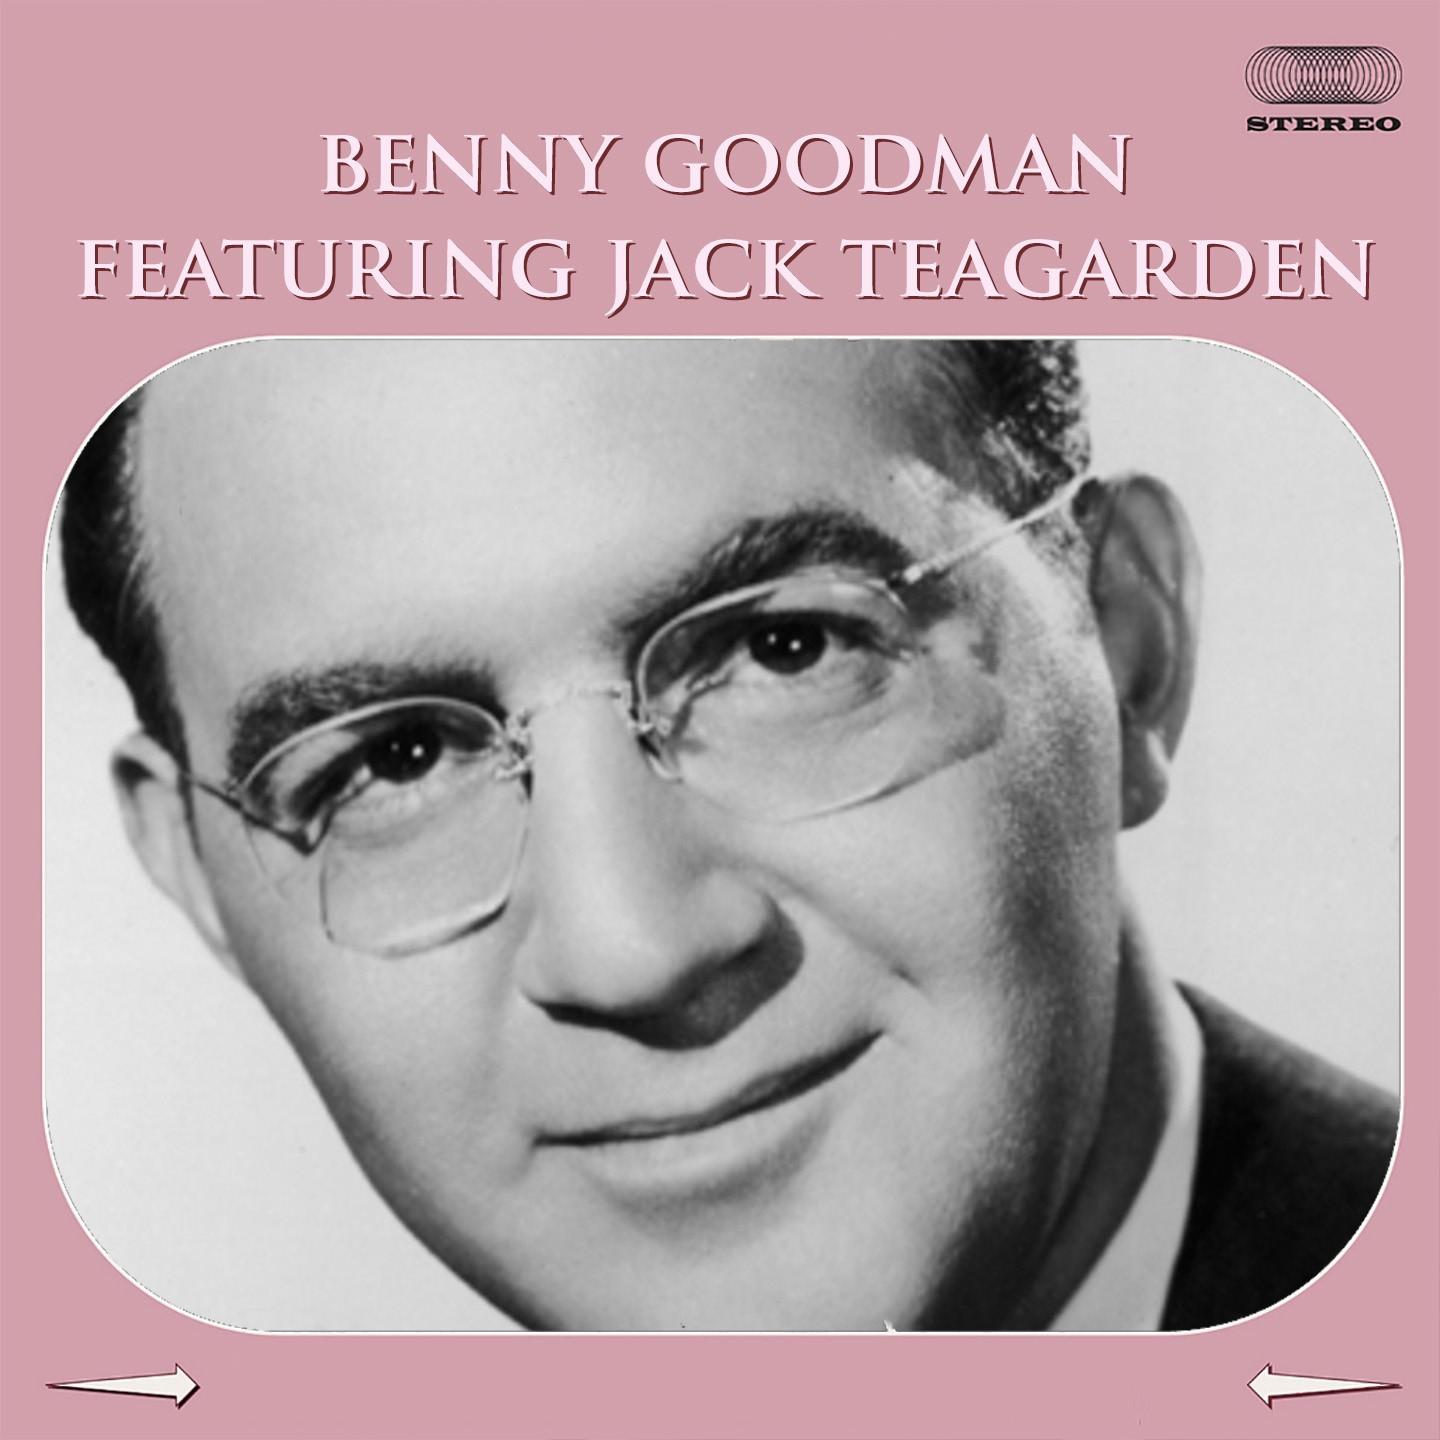 Benny Goodman Featuring Jack Teagarden Medley: I Gotta Right to Sing the Blues  Ain tcha Glad  Texas Tea Party  Dr. Heckle and Mr. Jibe  Basin Street Blues  Beale Street Blues  Moonglow  As Long as I Live